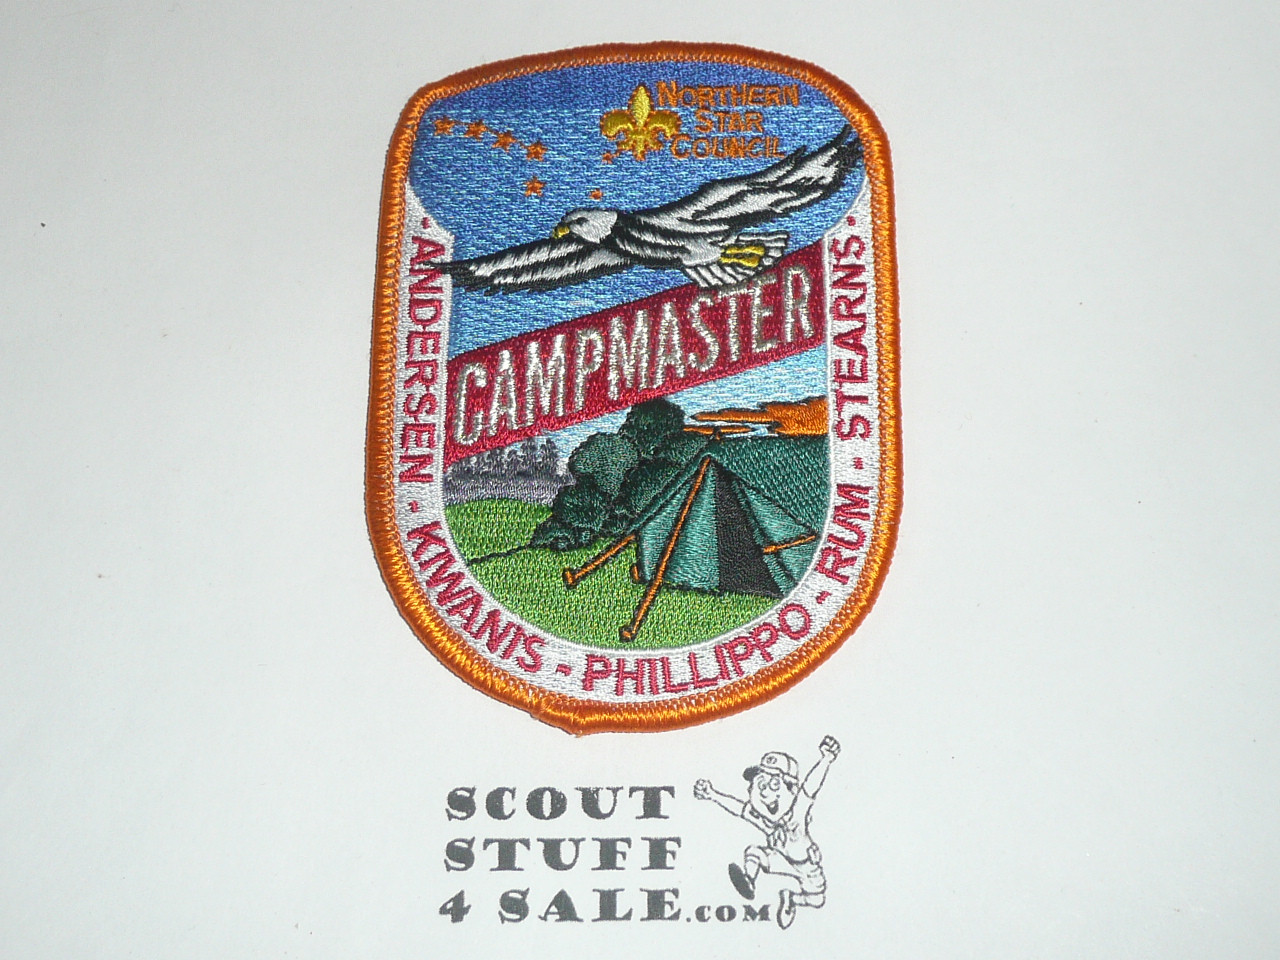 North Star Council Campmaster Patch